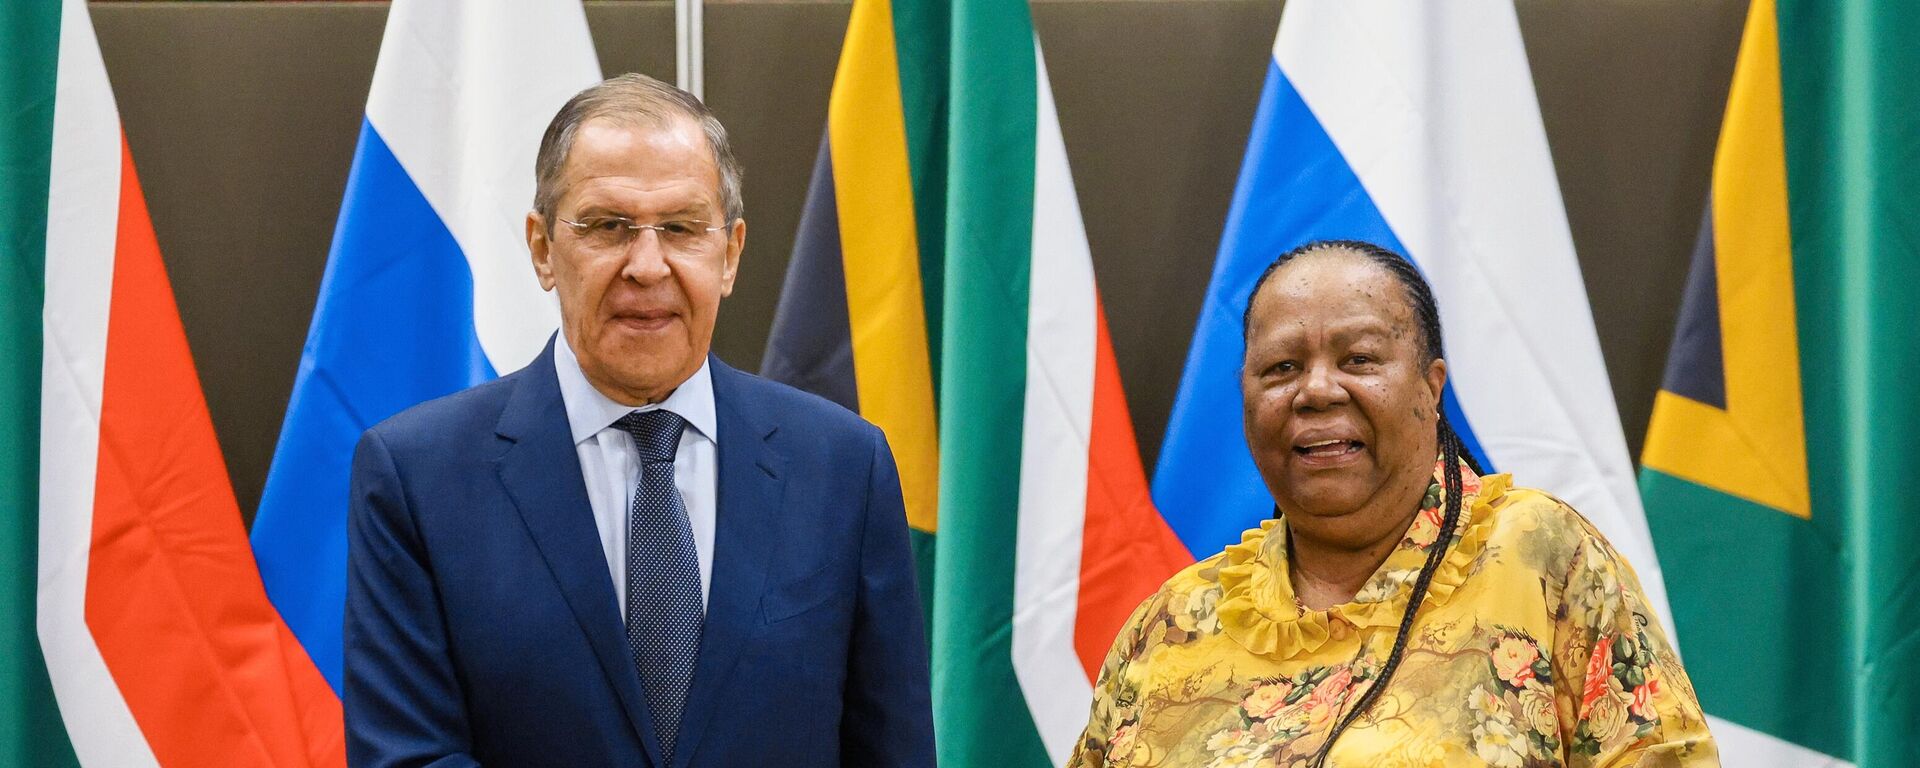 Russian Foreign Minister Sergey Lavrov and Minister of Foreign Affairs of South Africa Naledi Pandor during a joint press conference following a meeting in Pretoria, South Africa, on Monday, Jan. 23, 2023. - Sputnik Africa, 1920, 03.05.2023